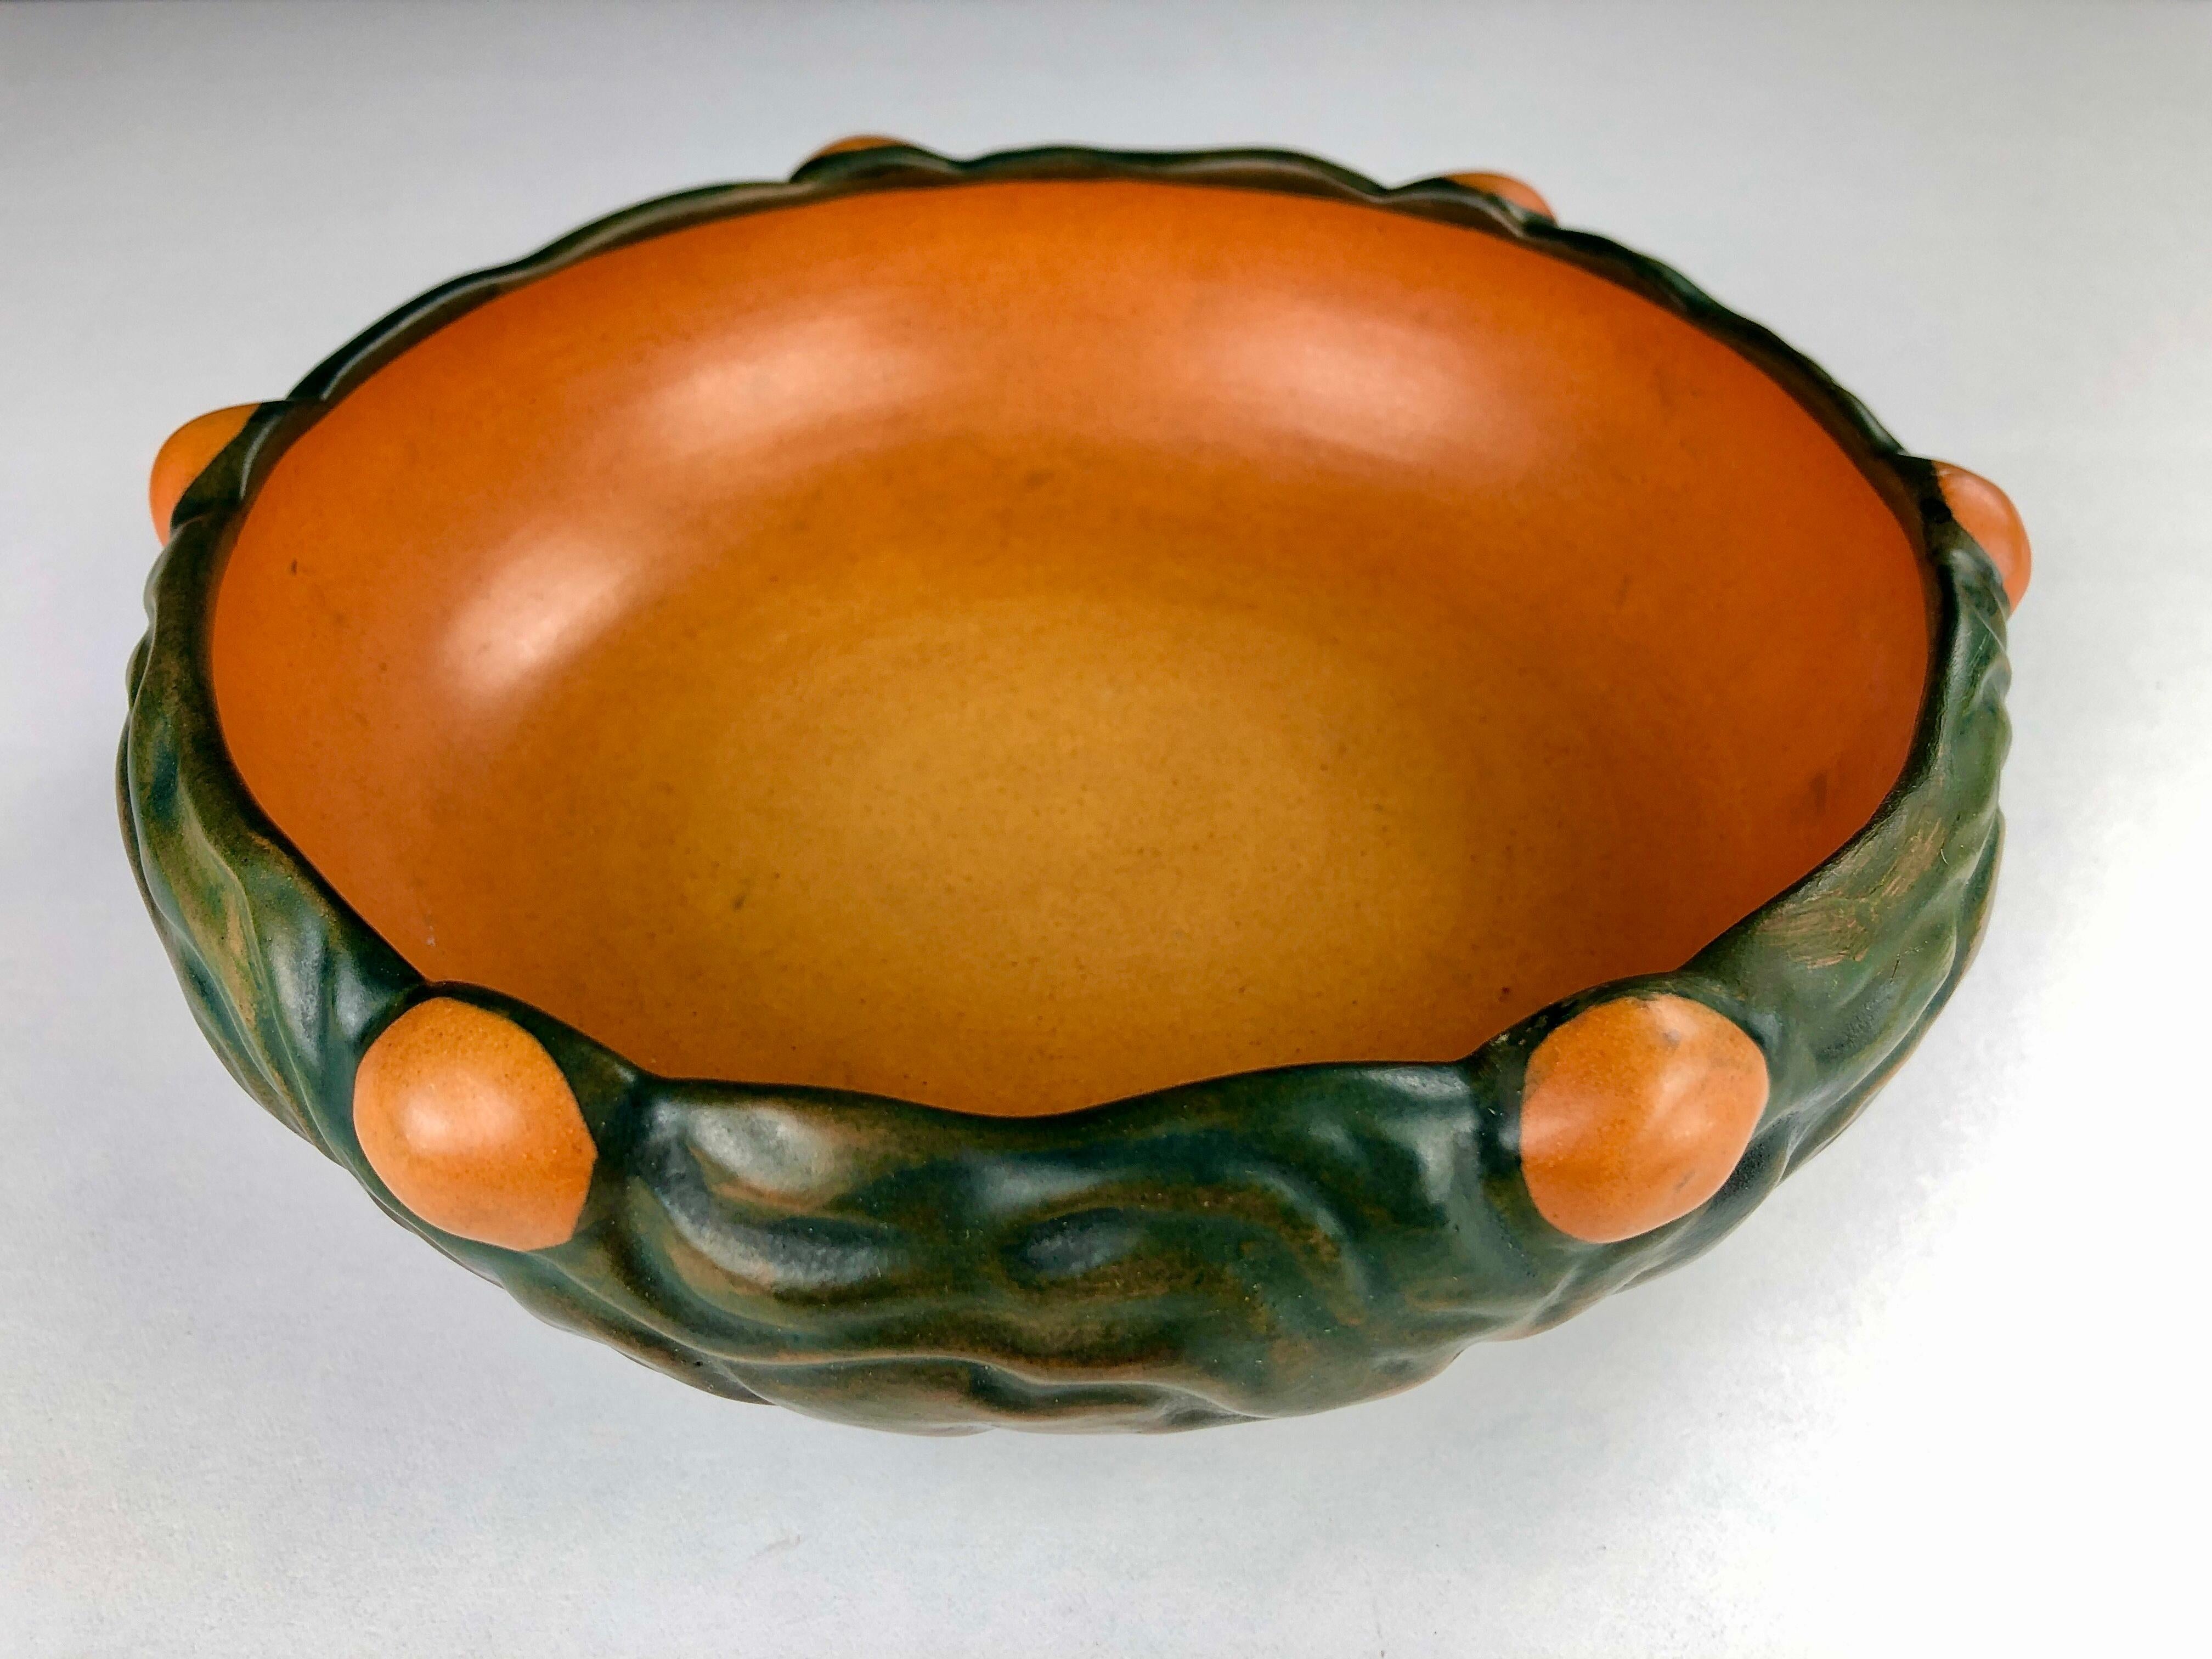 Hand-crafted Danish Art Nouveau bowl by Thorvald Bindesboell for P. Ipsens Enke designed in 1905

The bowl is in good vintage condition.

Thorvald Bindesbøll (1846-1908) is was Denmark's leading ornamental artist of his time. His pronounced